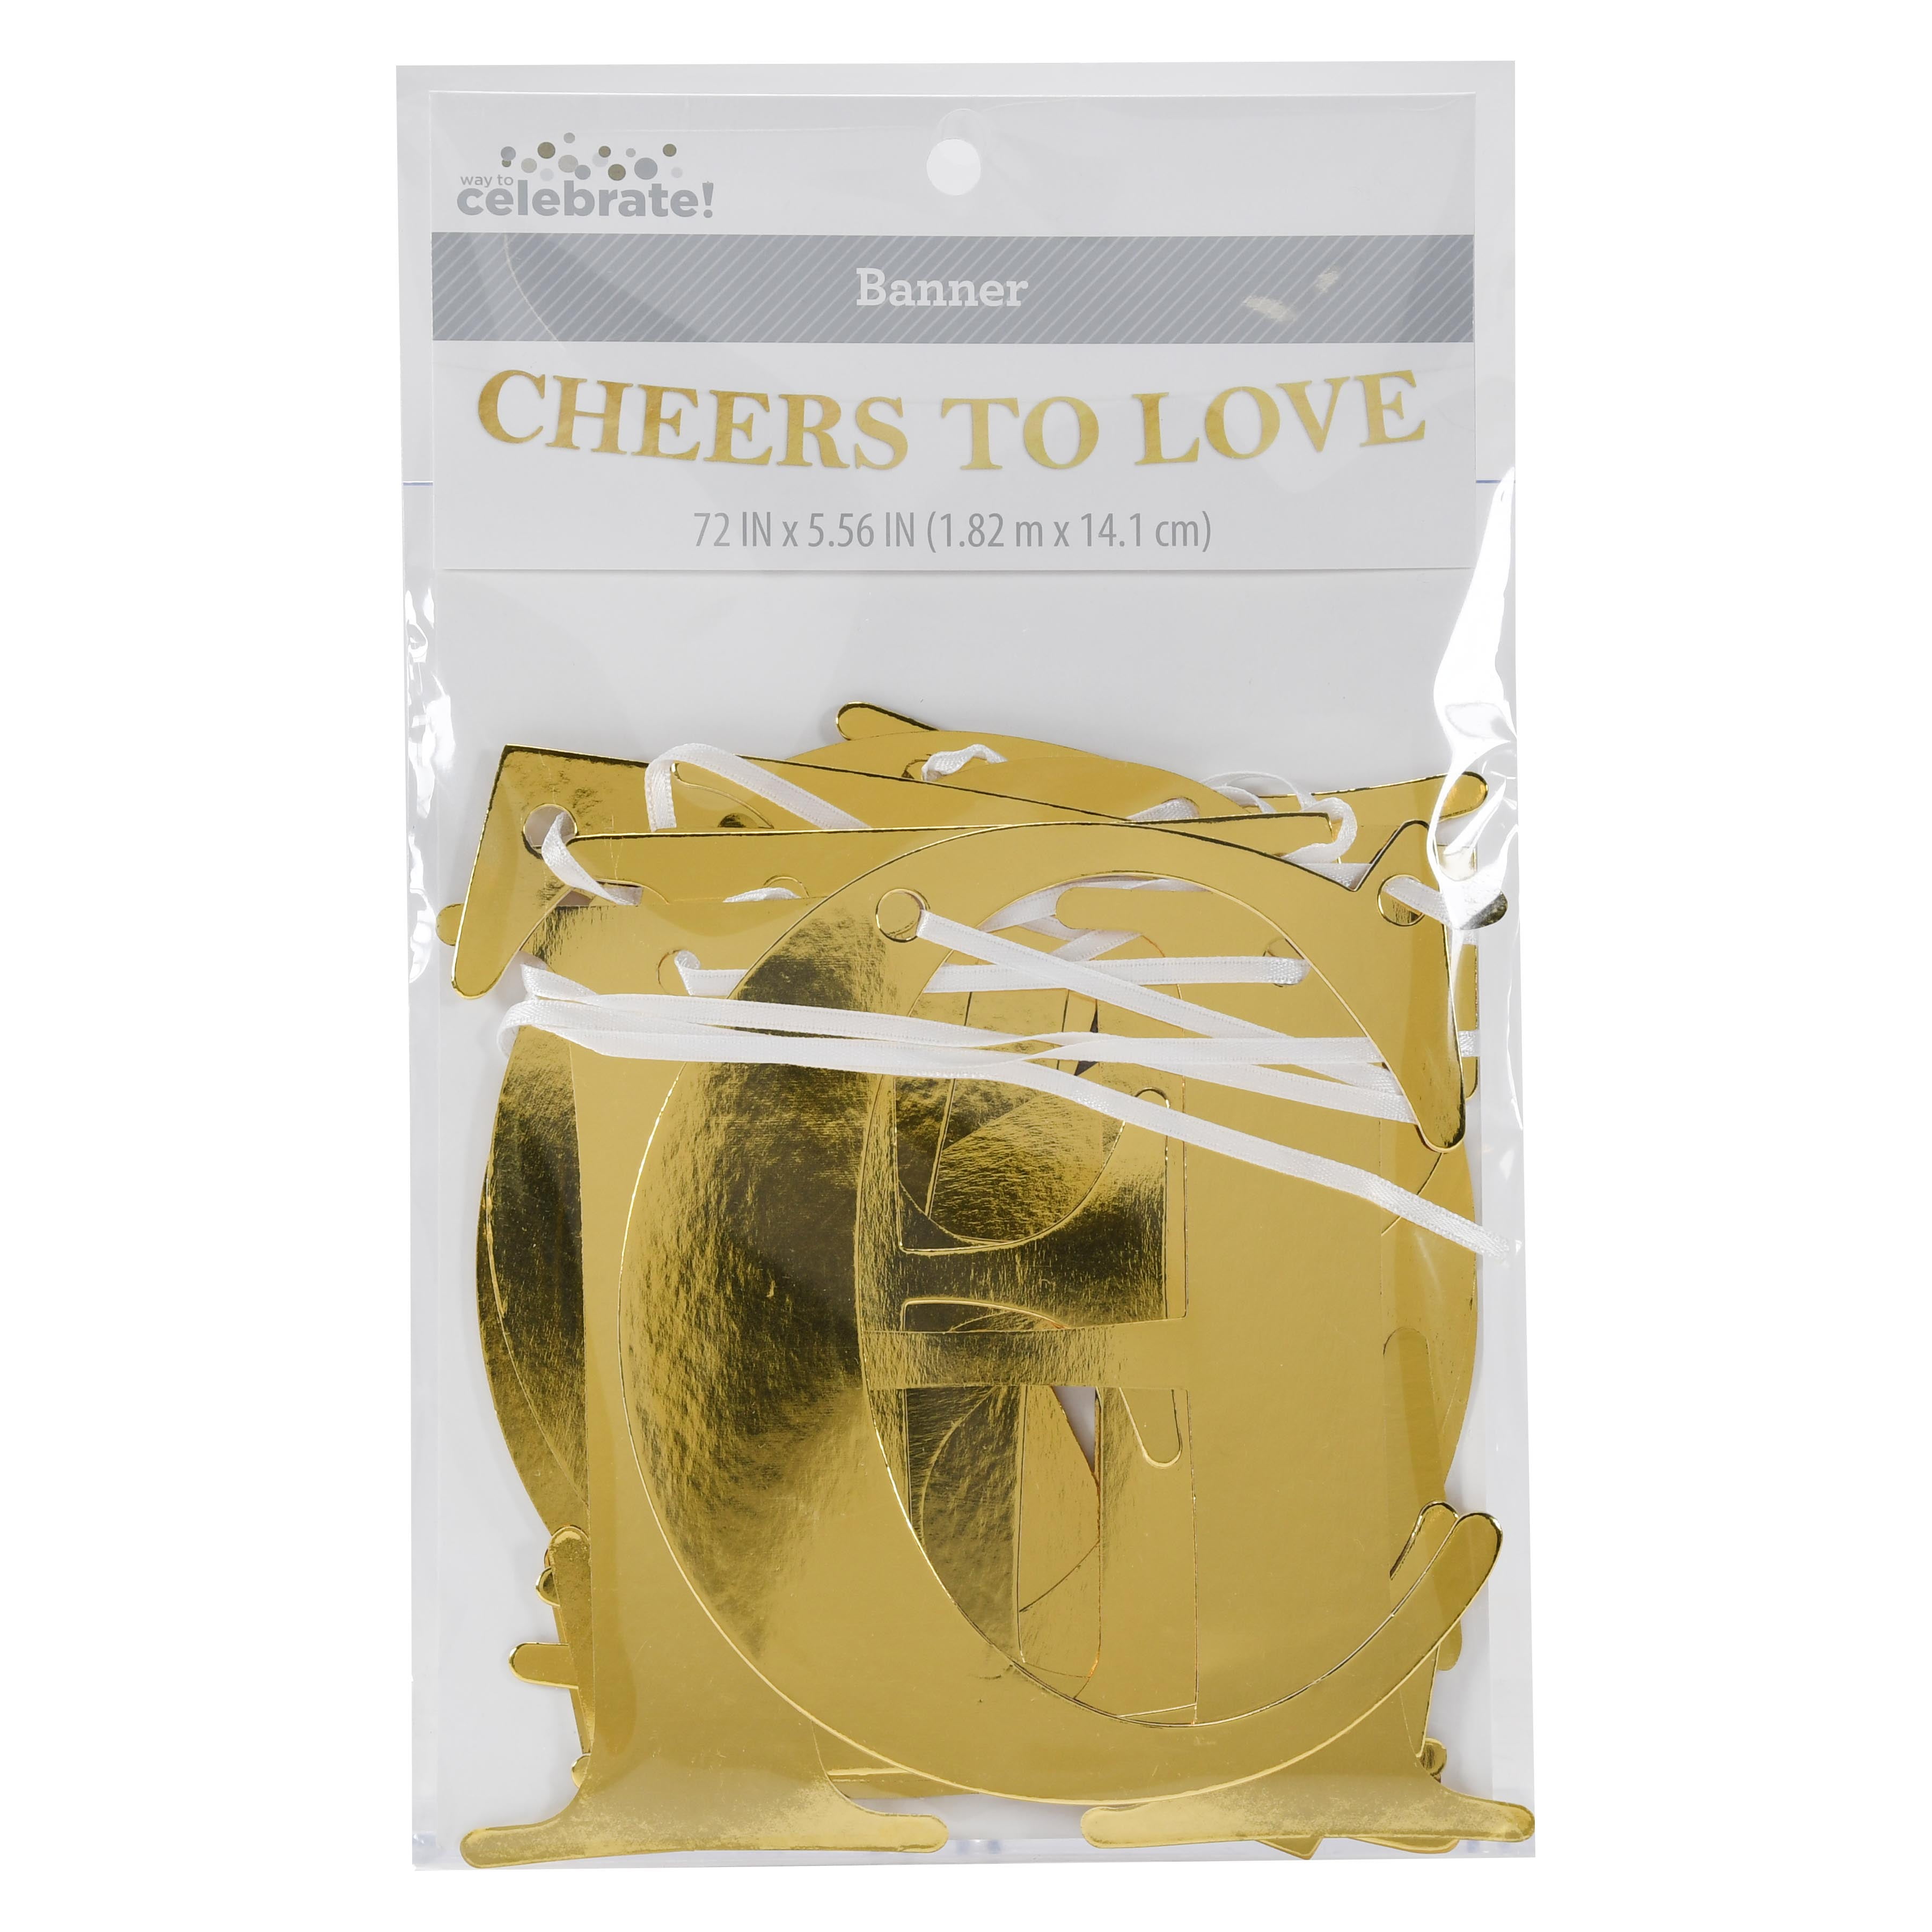 Way To Celebrate Cheers to Love Gold Cut-Out Banner for Weddings or Any Anniversary